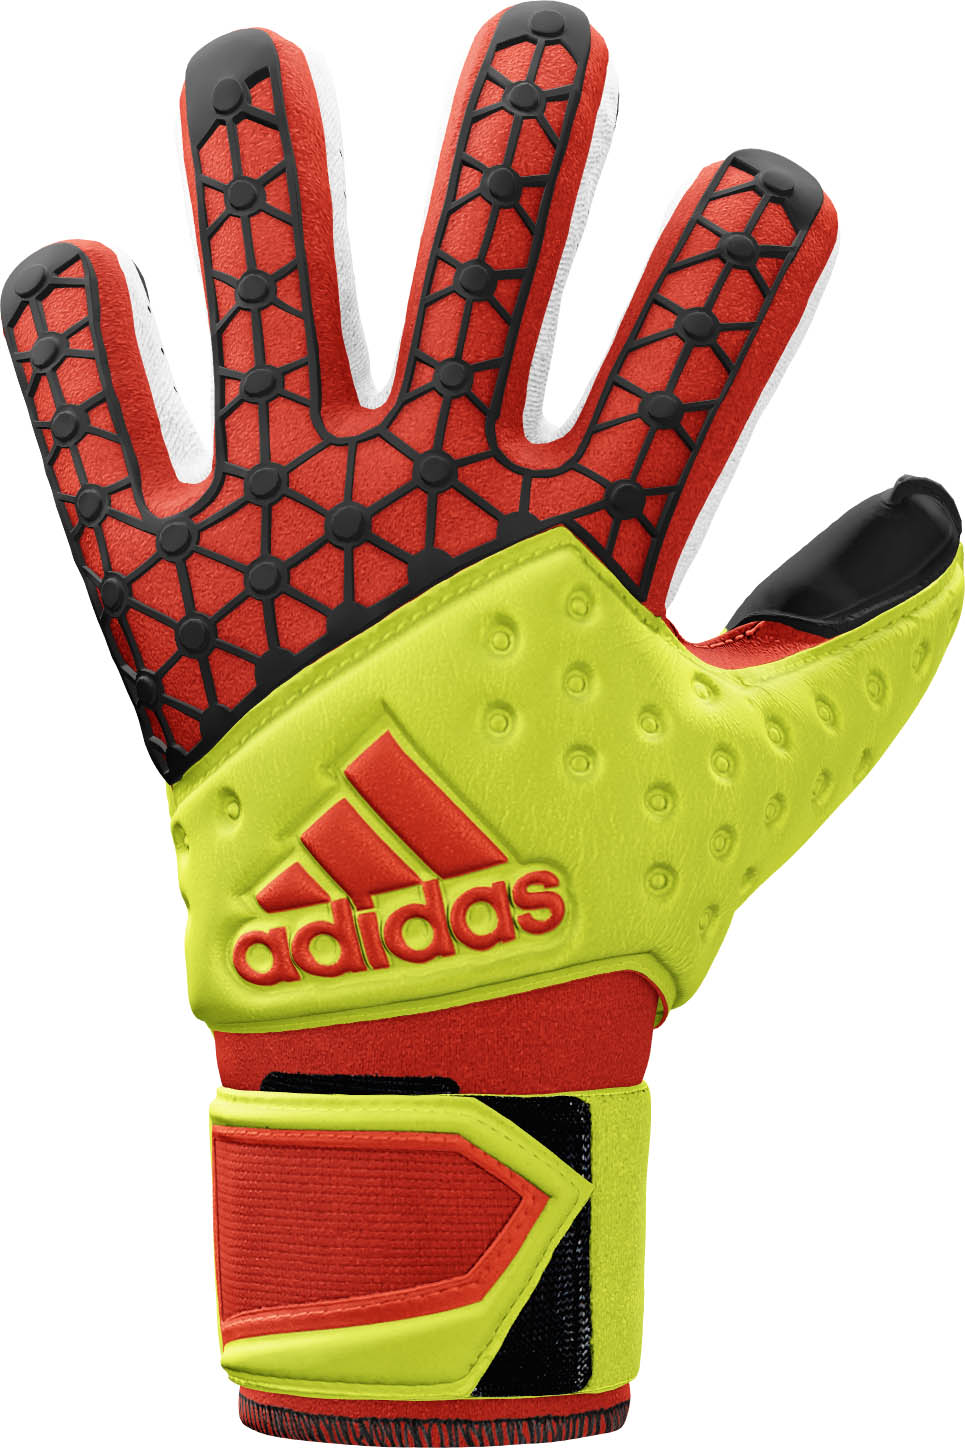 Gang tay thu mon Adidas Ace miAdidas www.soccerstore.vn